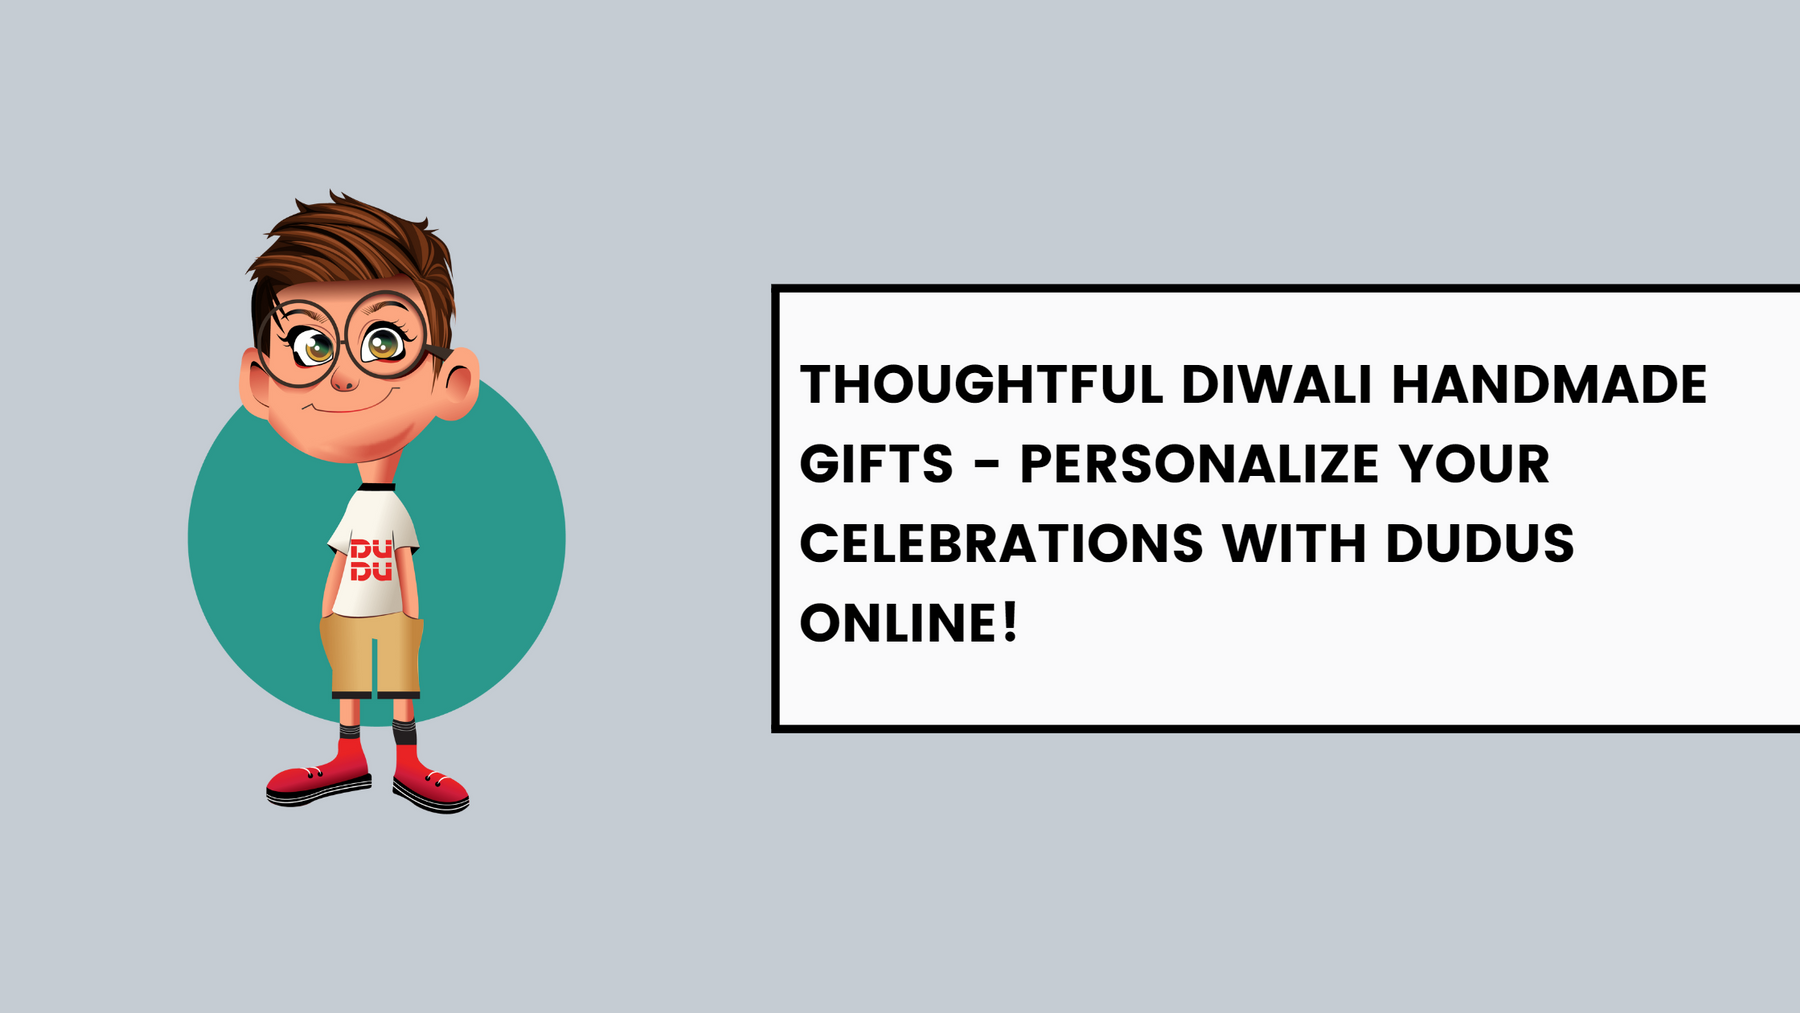 Thoughtful Diwali Handmade Gifts - Personalize Your Celebrations with Dudus Online!